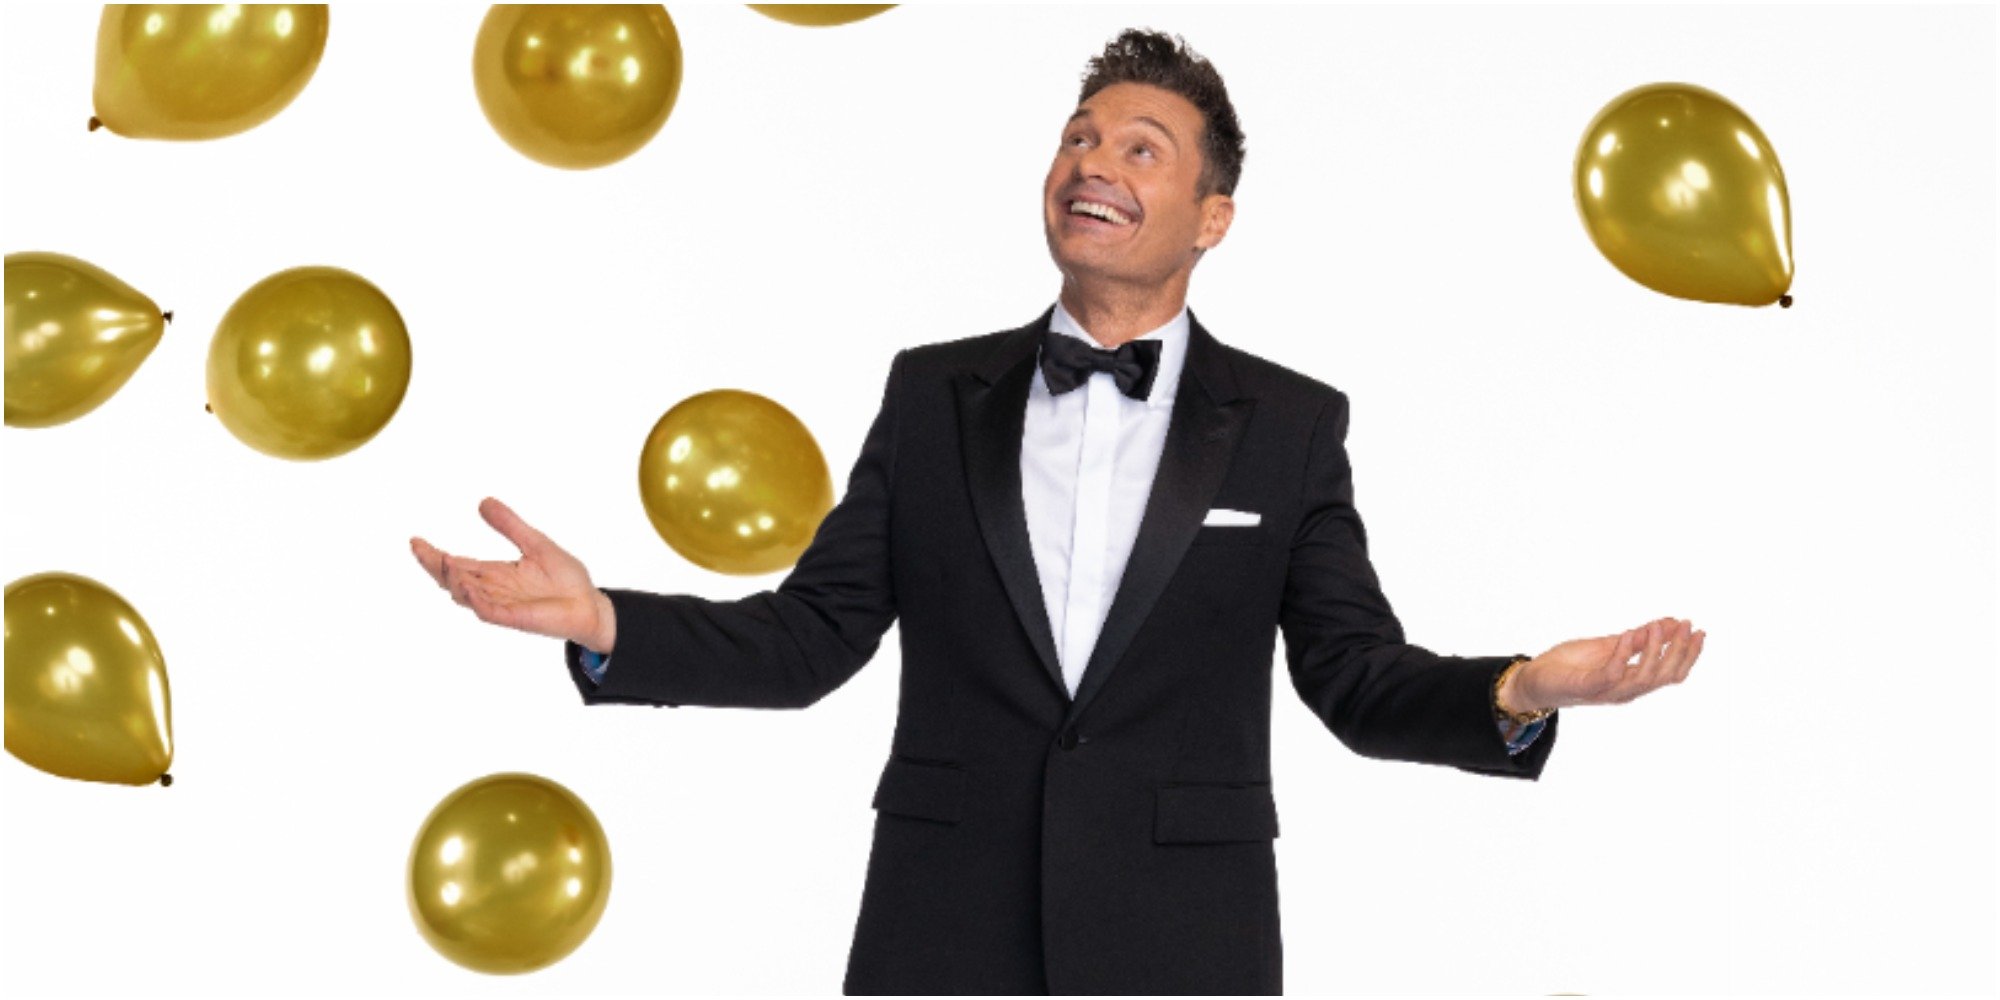 Ryan Seacrest with gold balloons surrounding him.